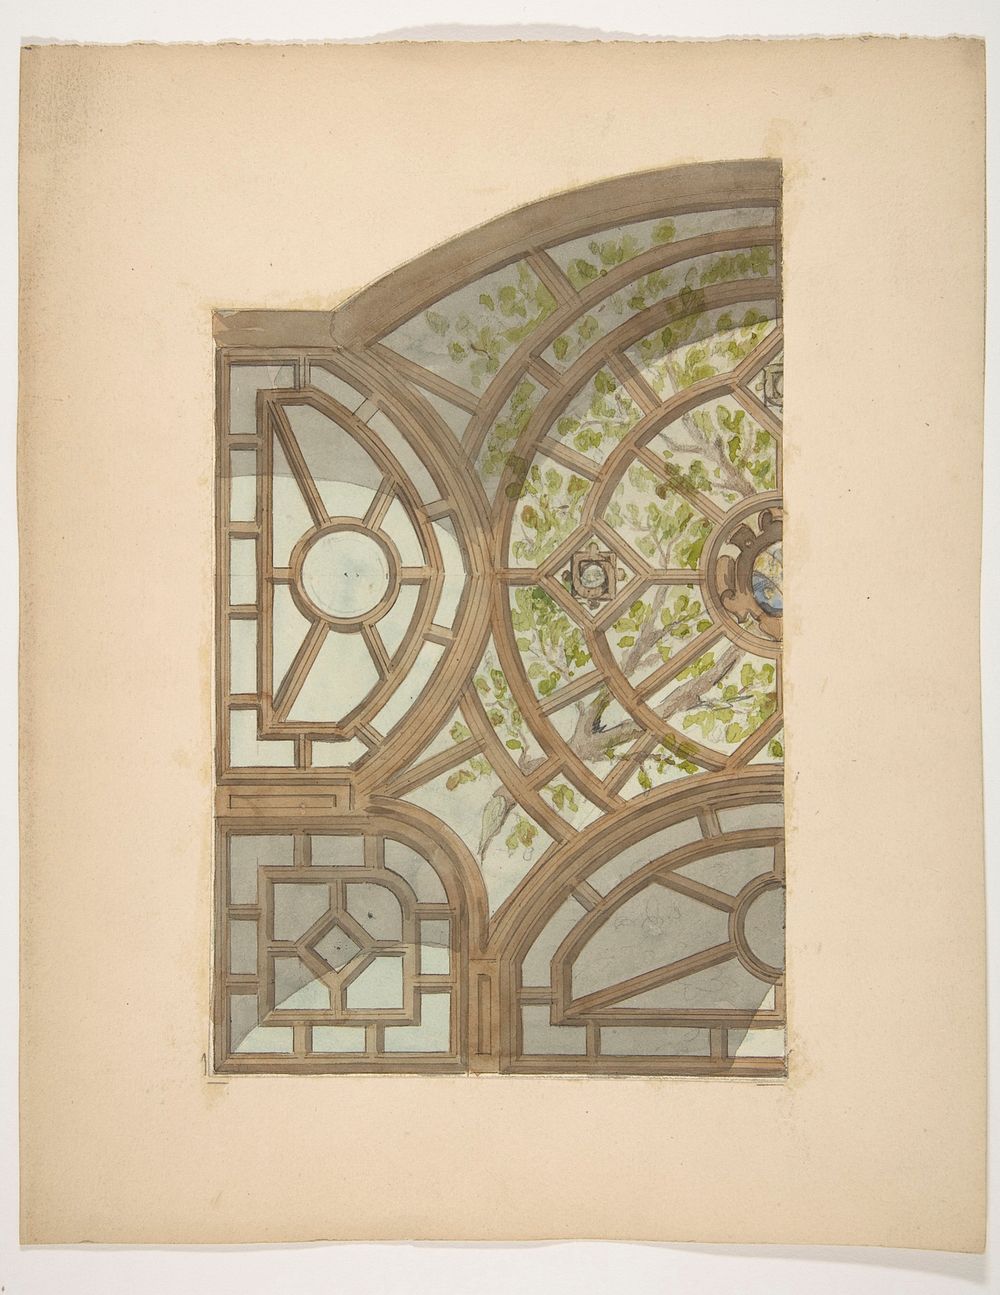 Design for one section of a ceiling painted with trees and lattices by Jules-Edmond-Charles Lachaise and Eugène-Pierre…